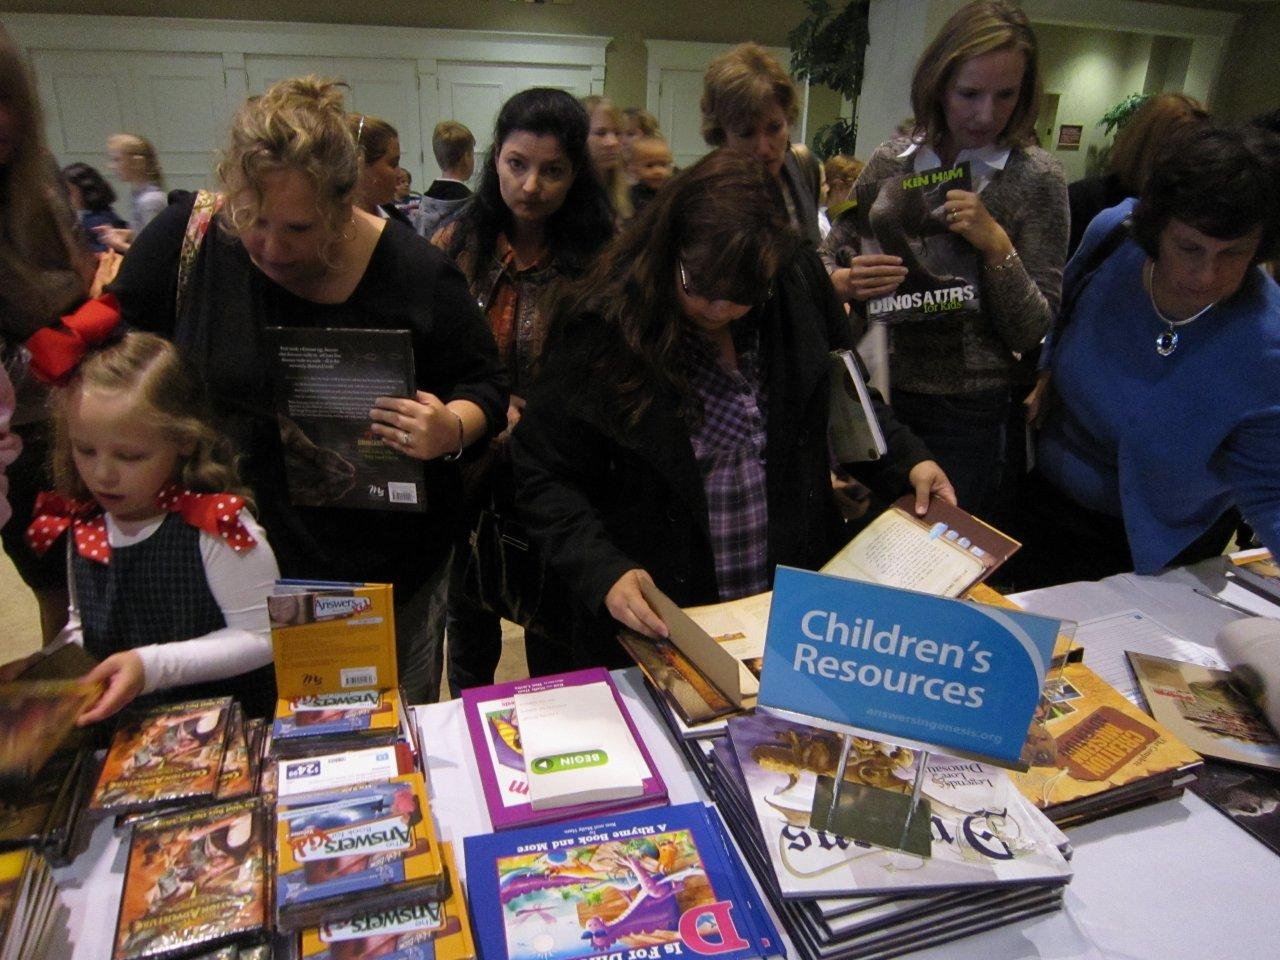 Kids and parents at the resource table